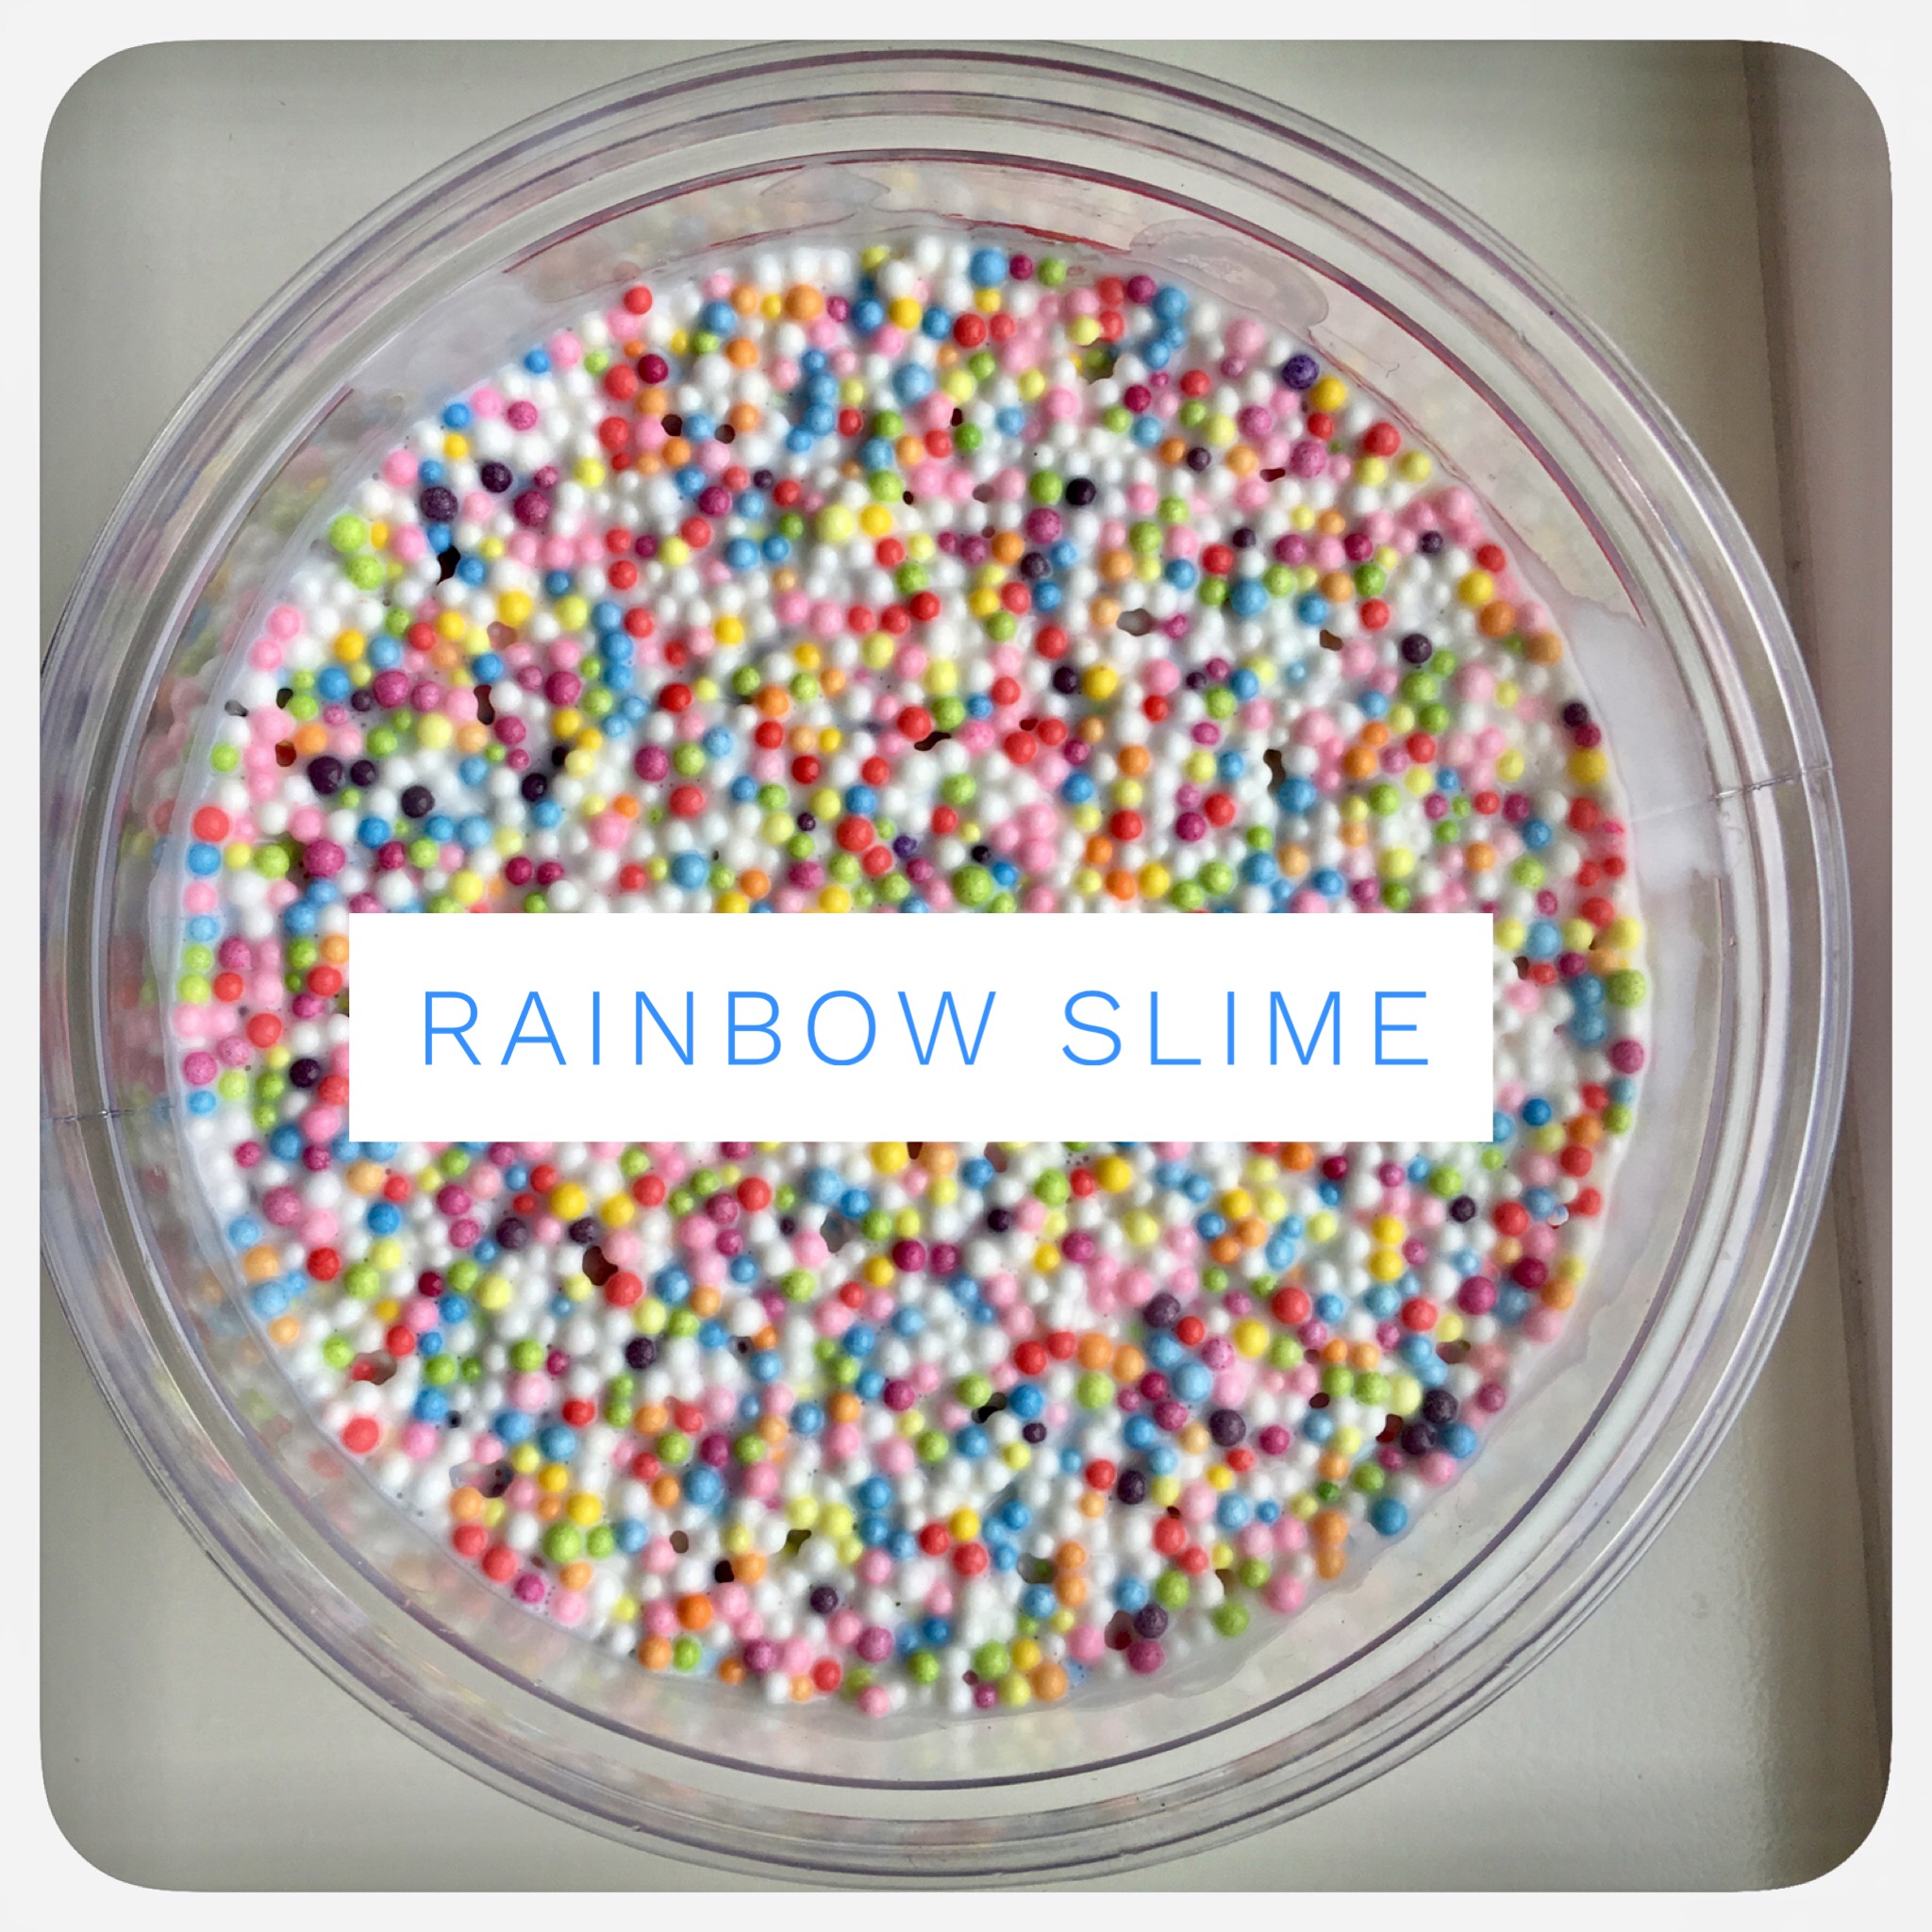 Creating simple sensory activities for kids to explore using slime. We made this with small, rainbow colored styrofoam balls purchased from Amazon. (size 0.18)